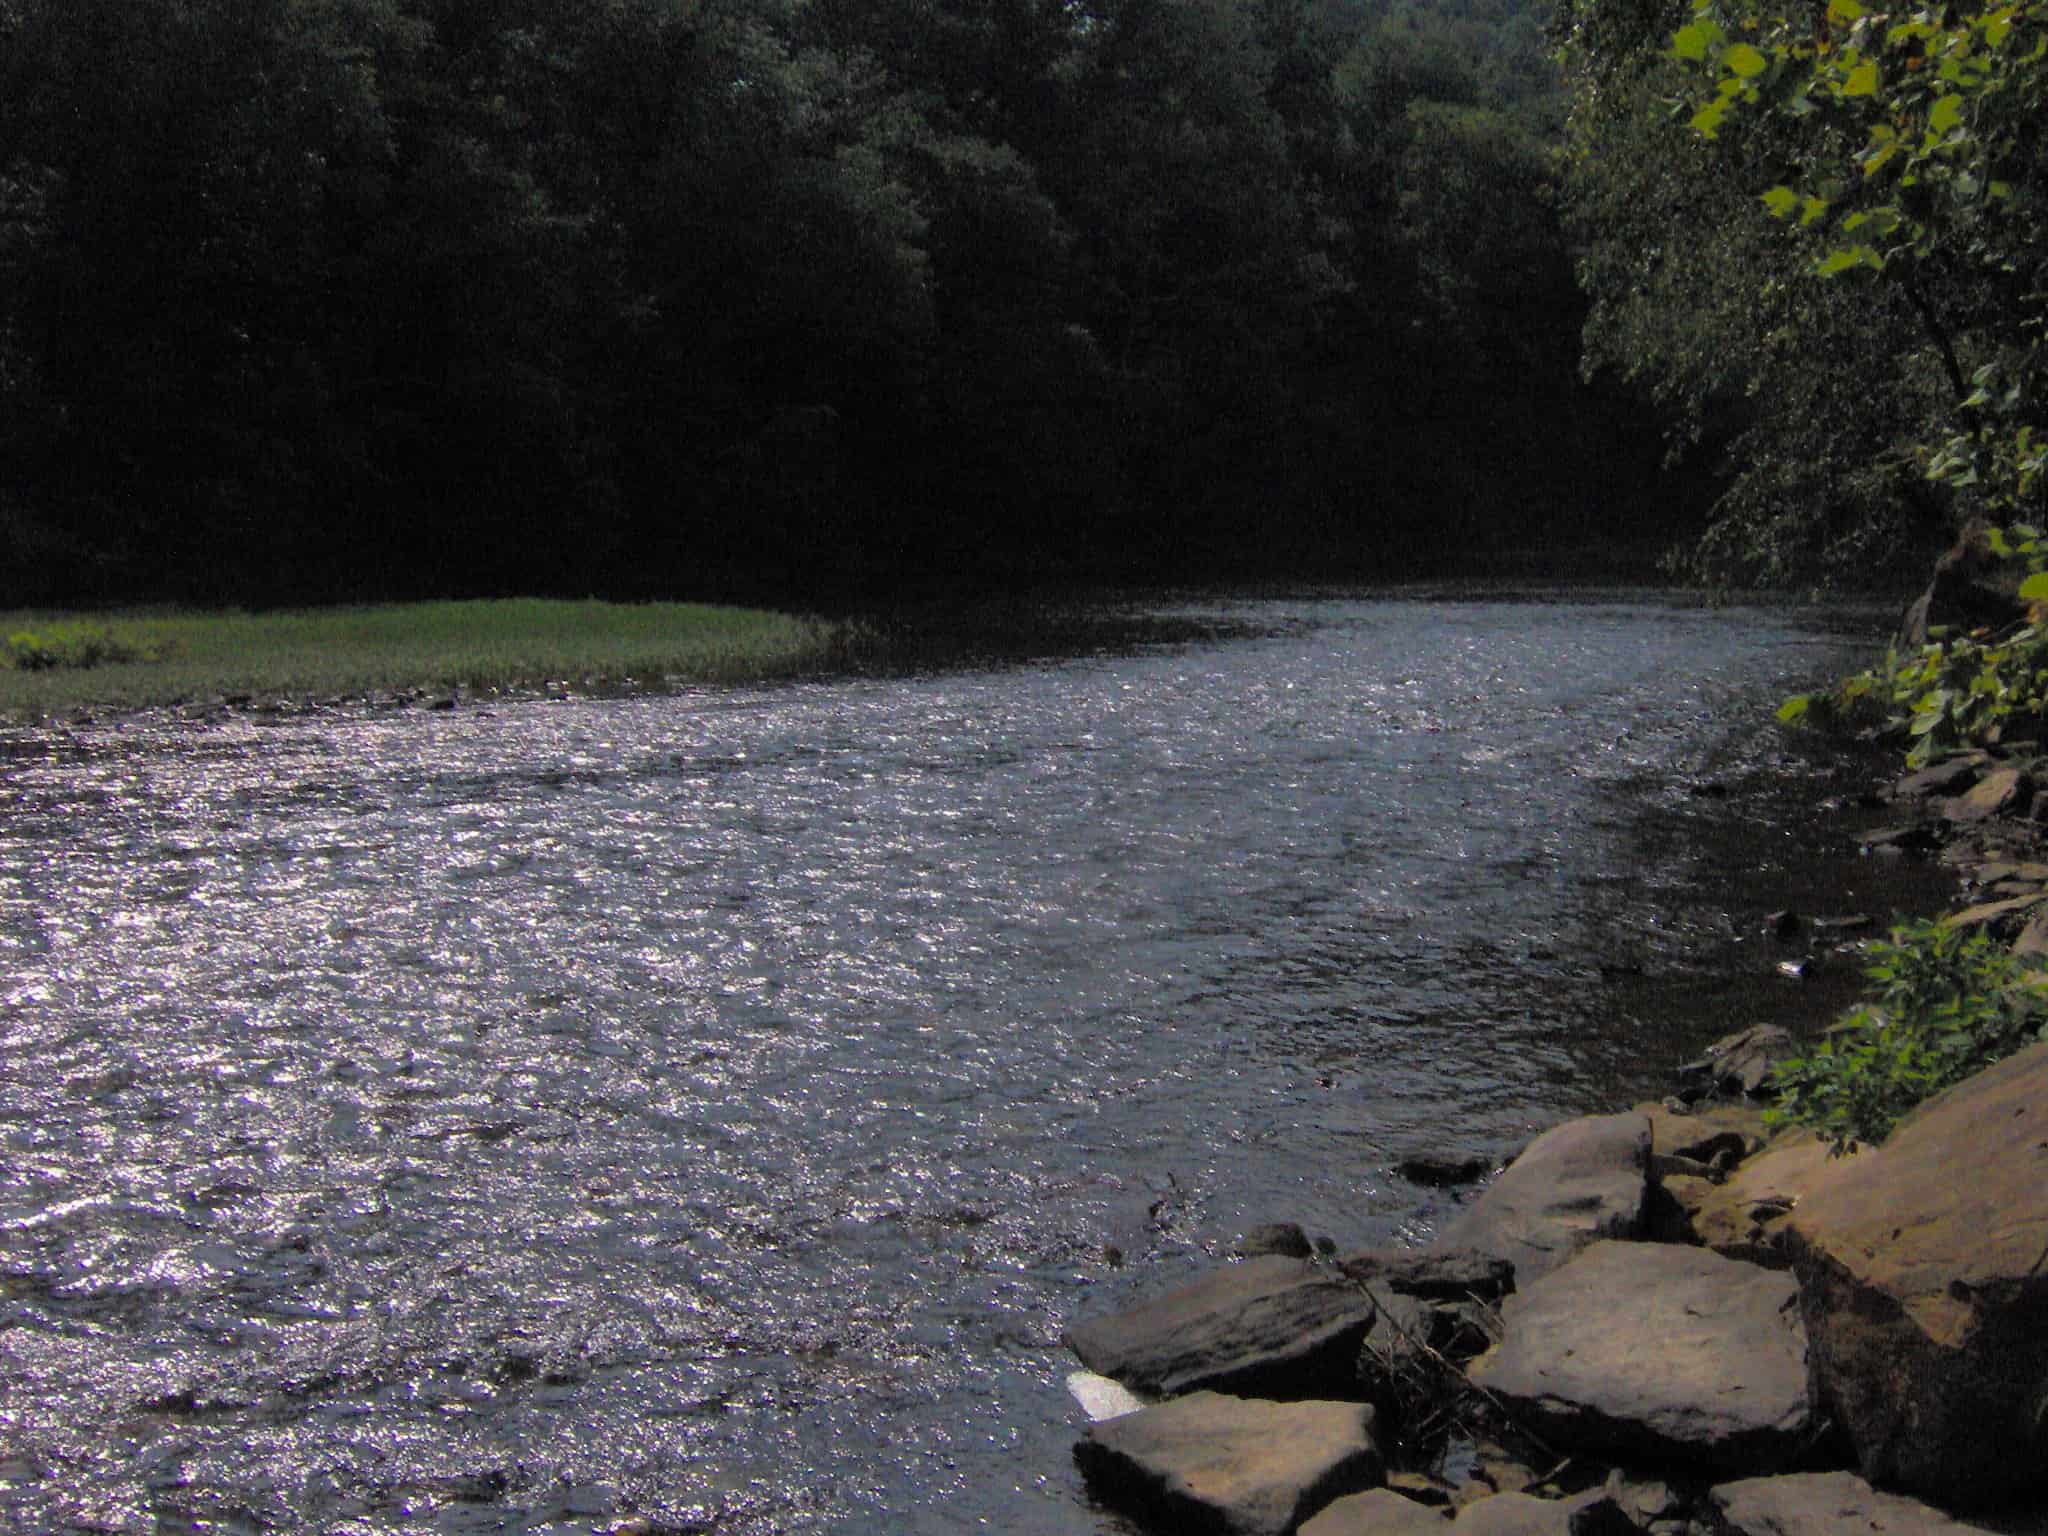 The Big South Fork of the Cumberland River, flowing near the old Blue Heron settlement in McCreary County, Kentucky